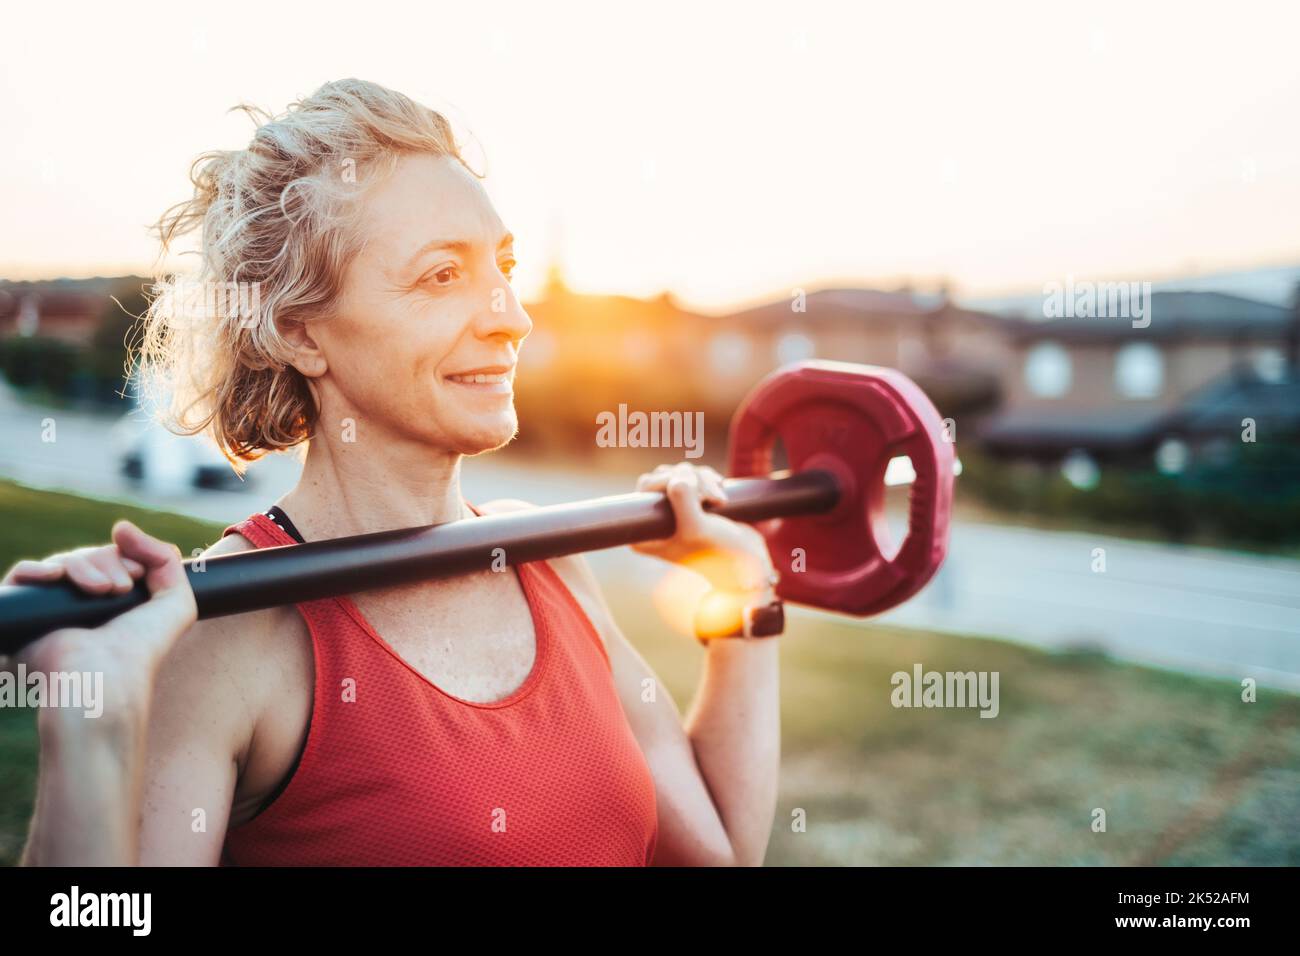 Fit Strong Young Woman Lifting Weights Stock Photo - Download Image Now -  Women, Exercising, Gym - iStock